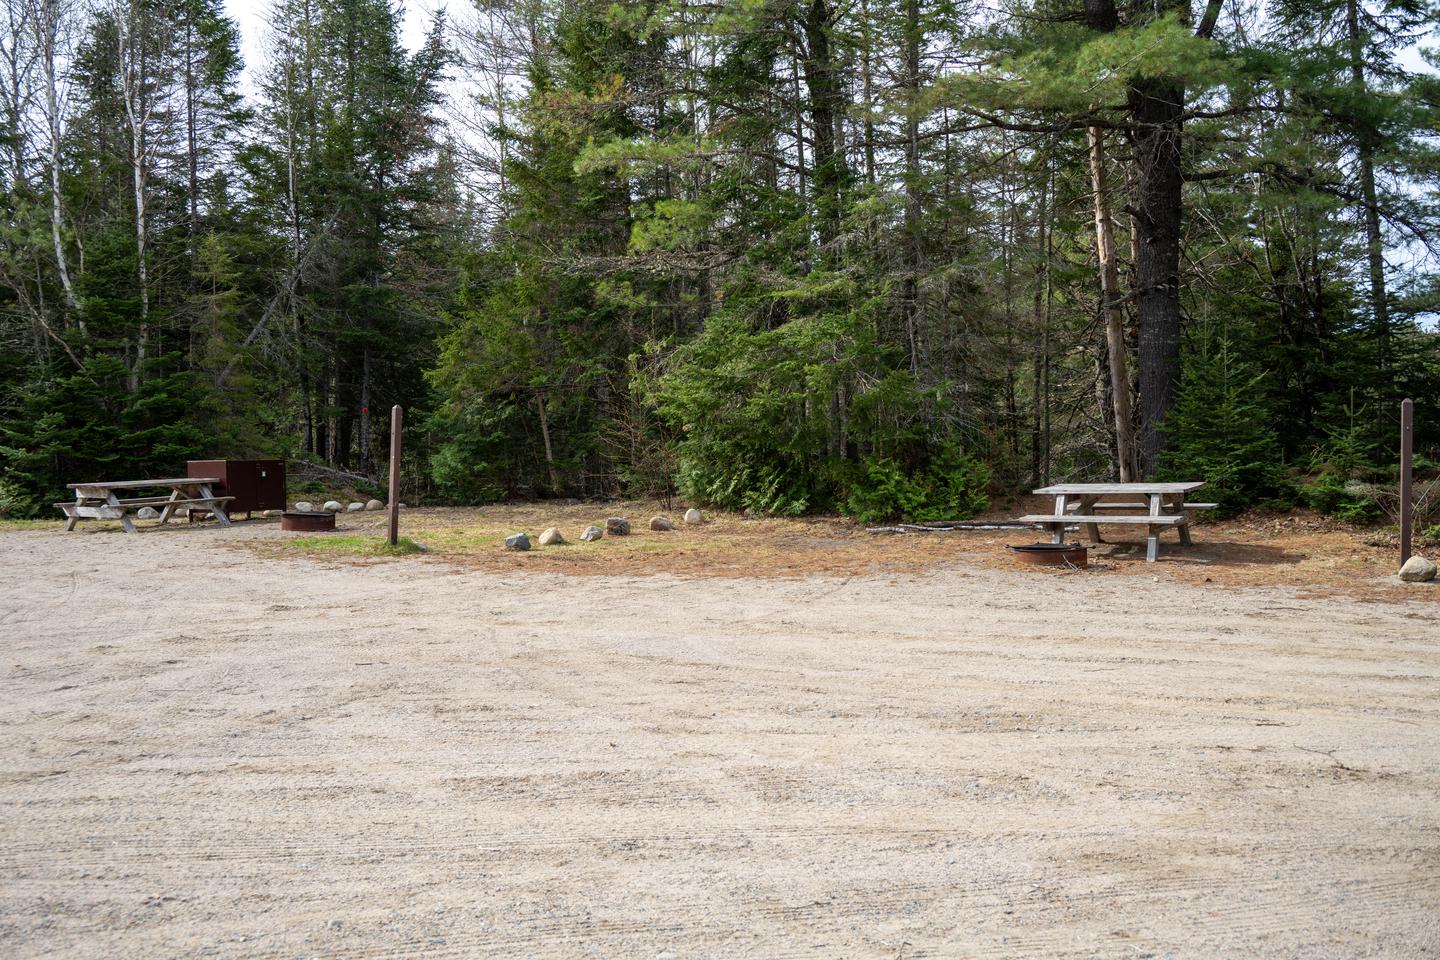 Two campsites side by side next to a gravel lot. The two sites each have a picnic table, a fire pit, and a food storage locker. A trail is next to the campsite to the left.A short hiking trail leads to a viewpoint at Sandbank Stream from the camping area.